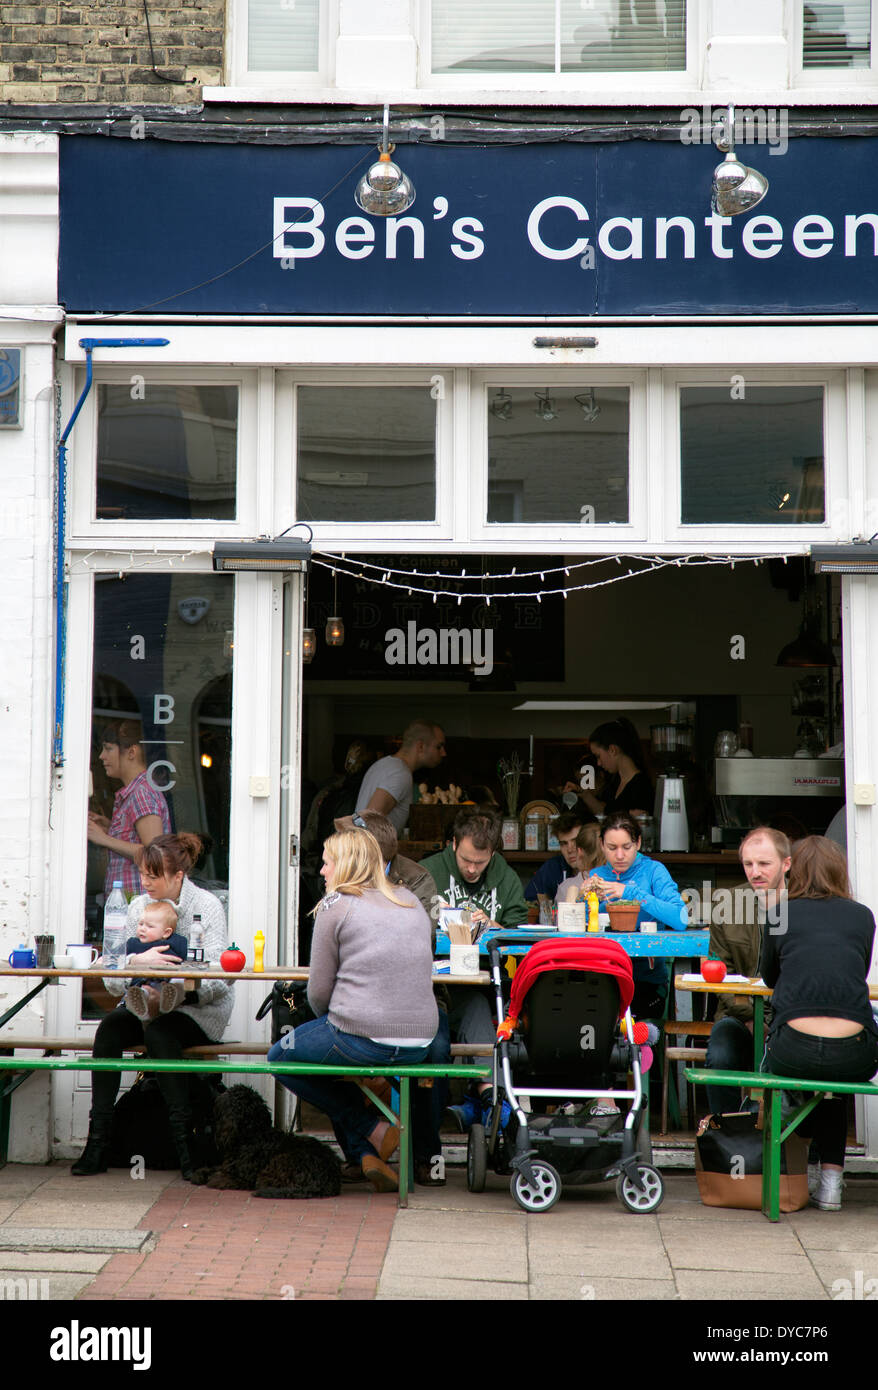 Ben's canteen on St John's Hill in Wandsworth - London SW11 - UK Stock Photo